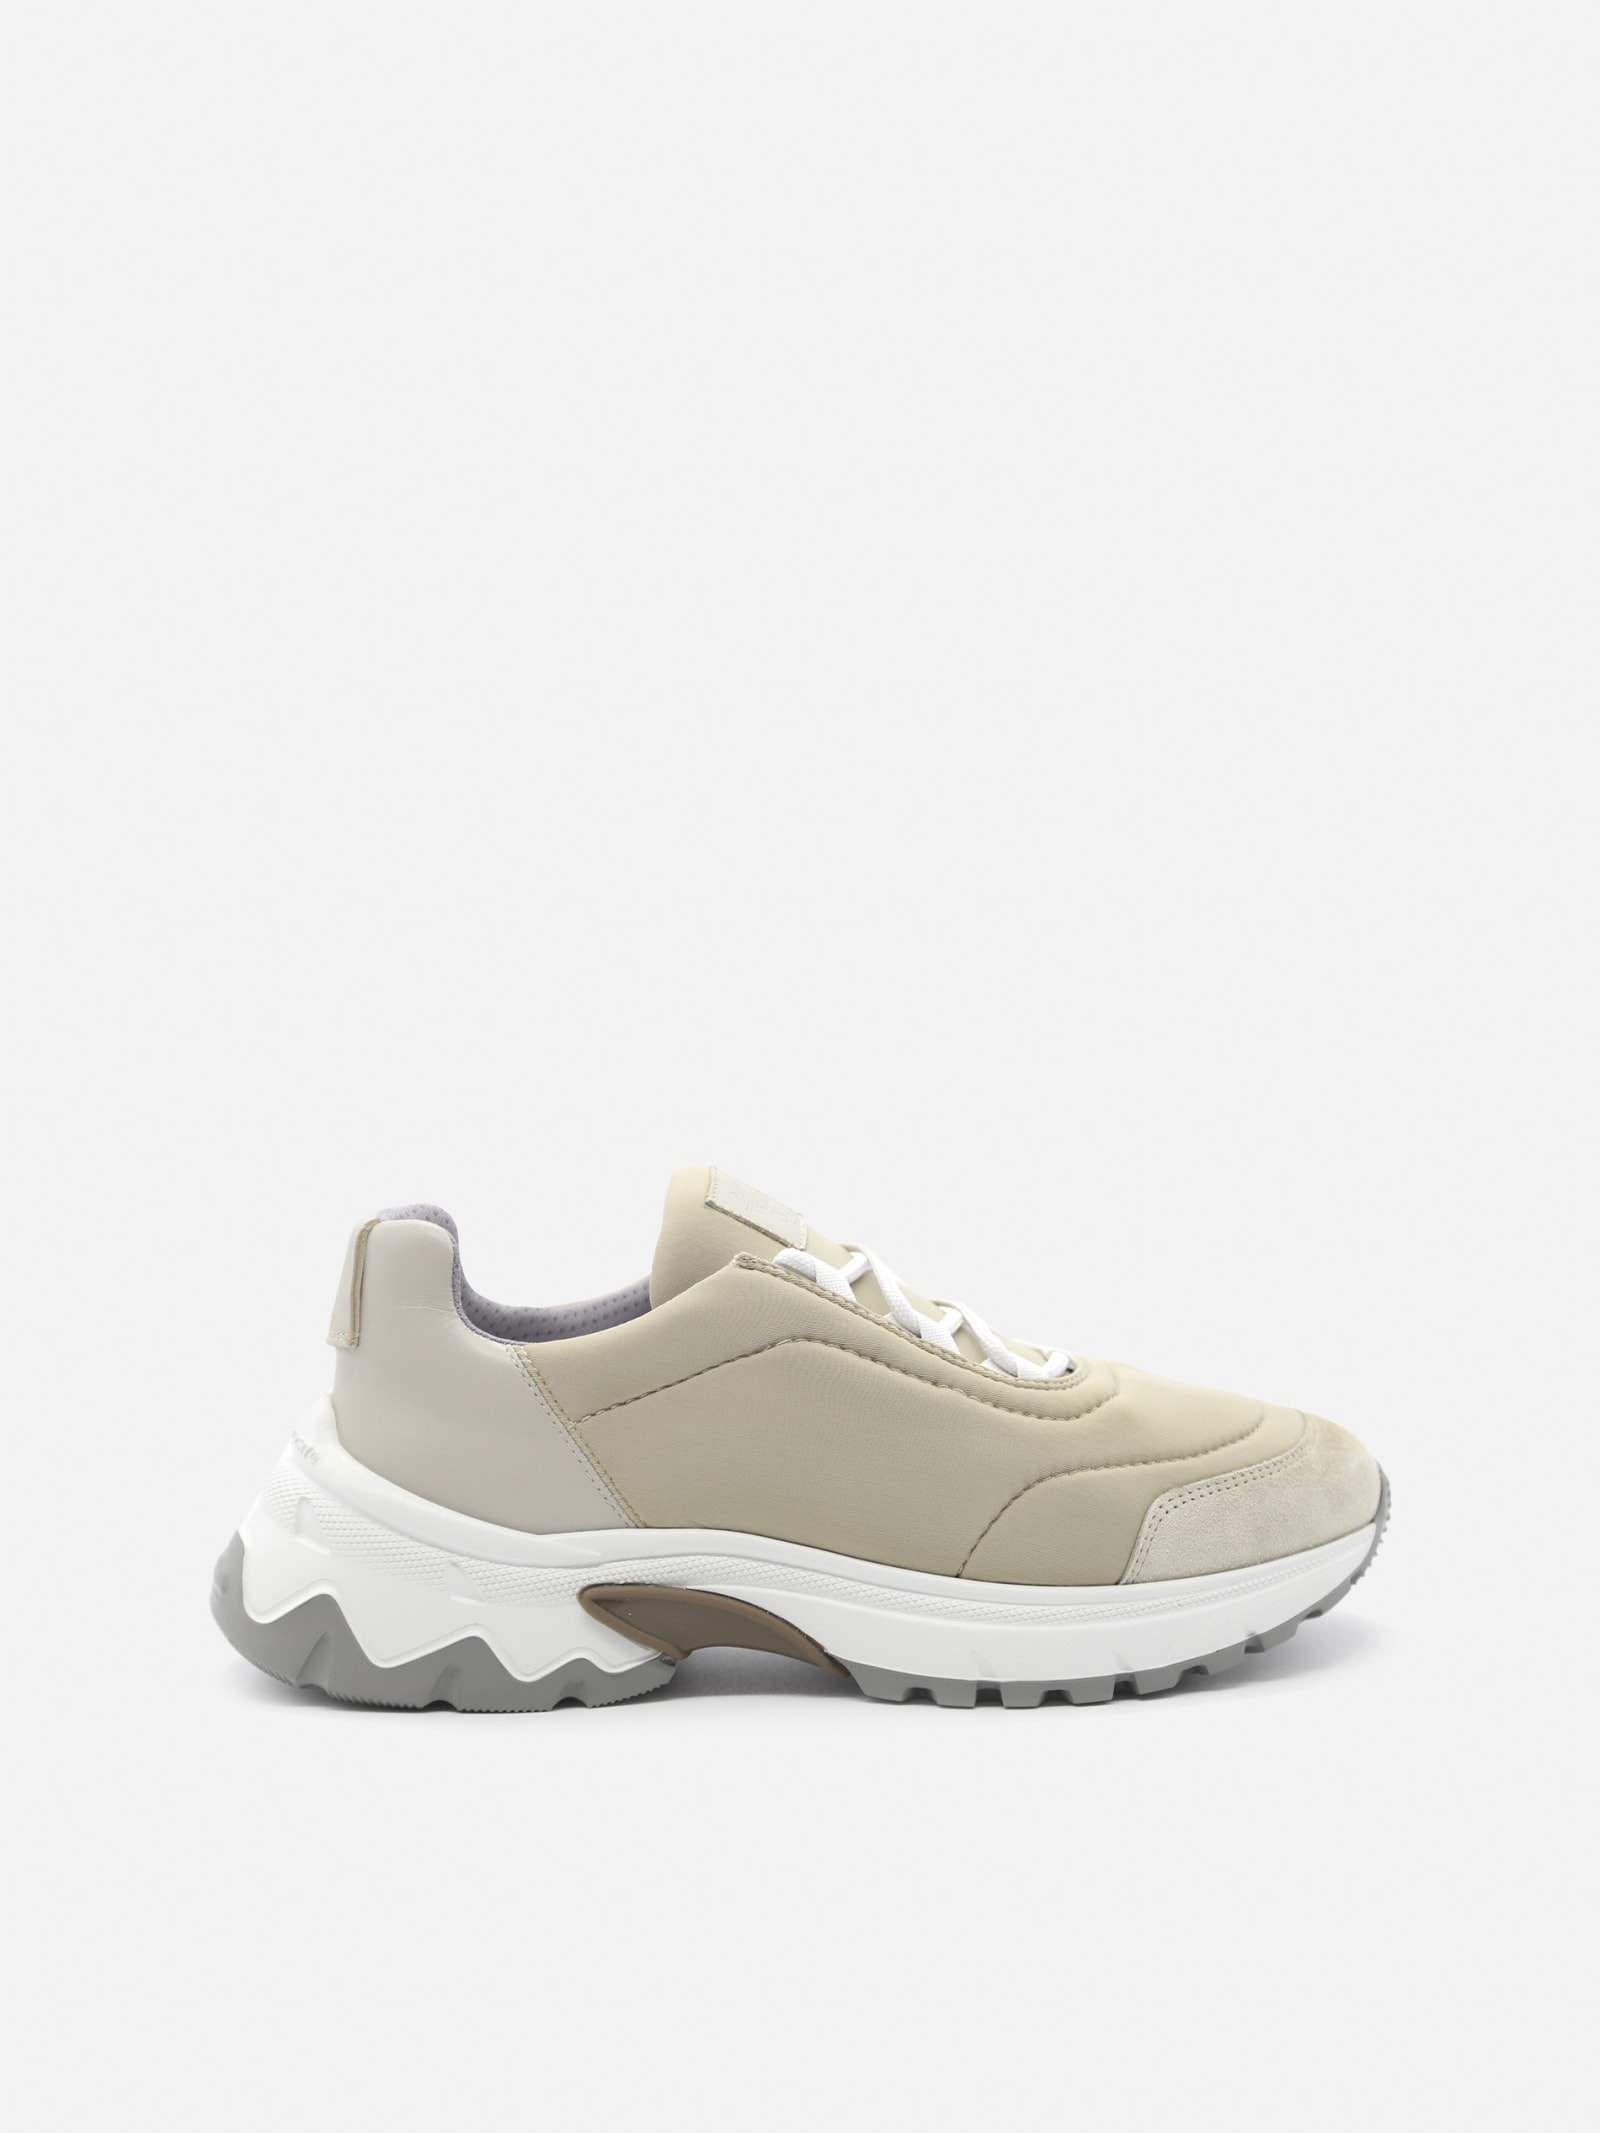 Eleventy Leather Sneakers With Contrasting Inserts